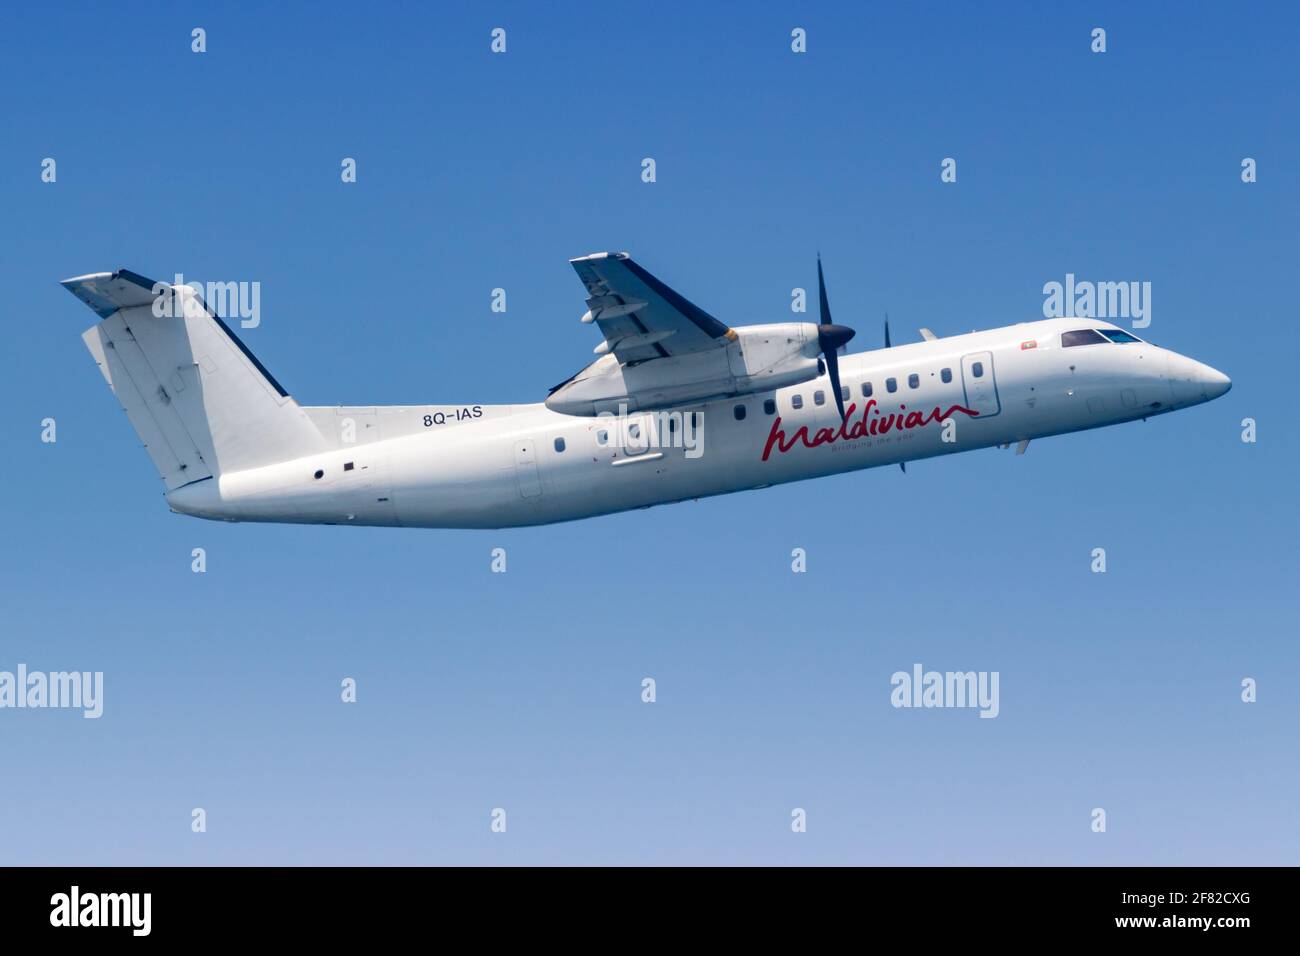 Male, Maldives – February 20, 2018: Maldivian Bombardier DHC-8-300 airplane at Male airport (MLE) in the Maldives. Stock Photo